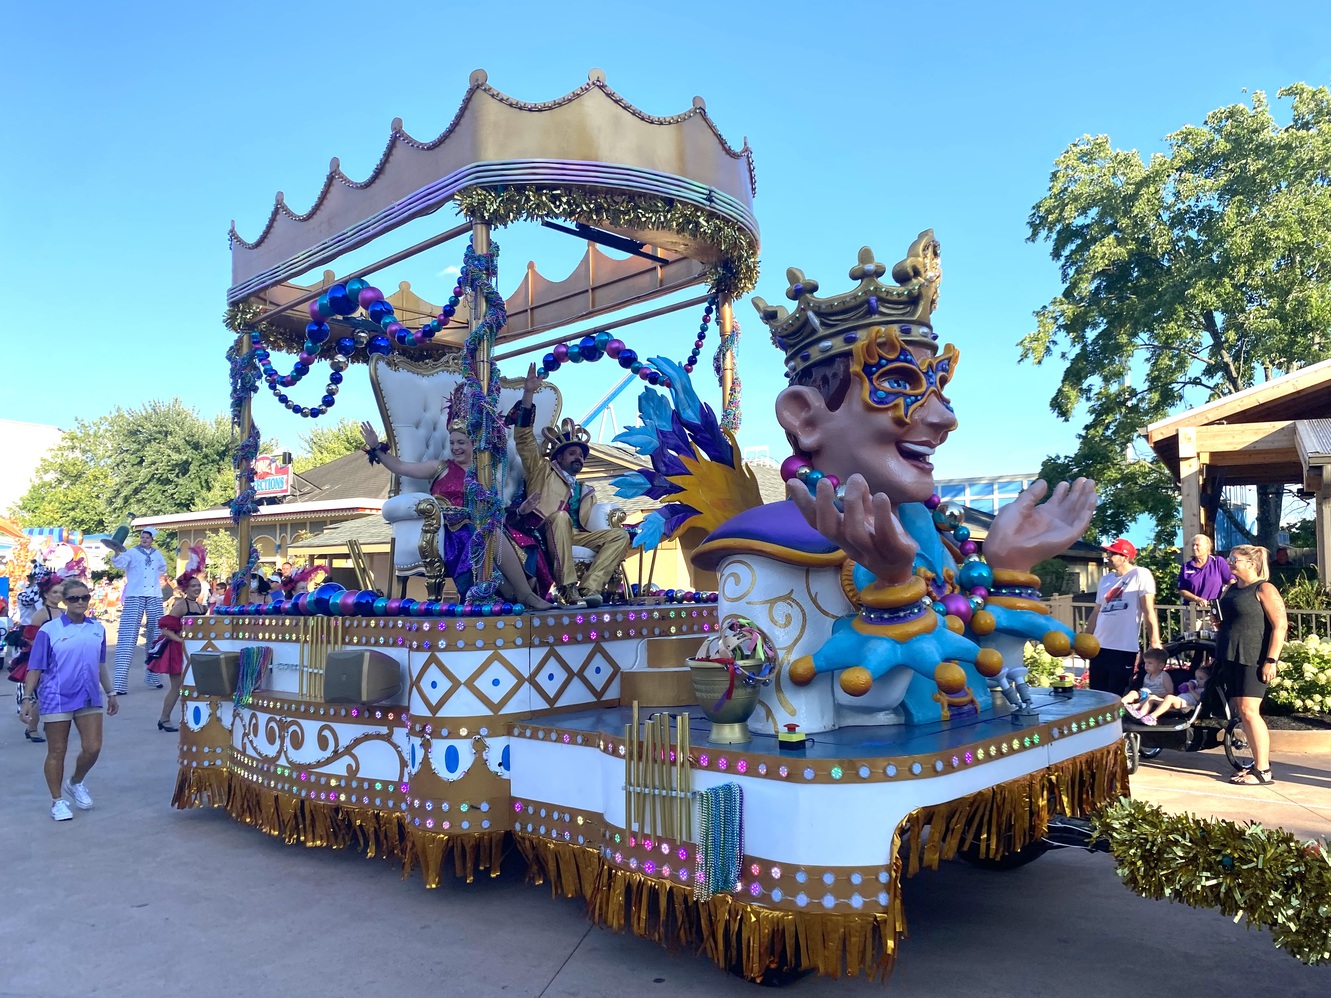 This
      is the fancy lead float for the parade.